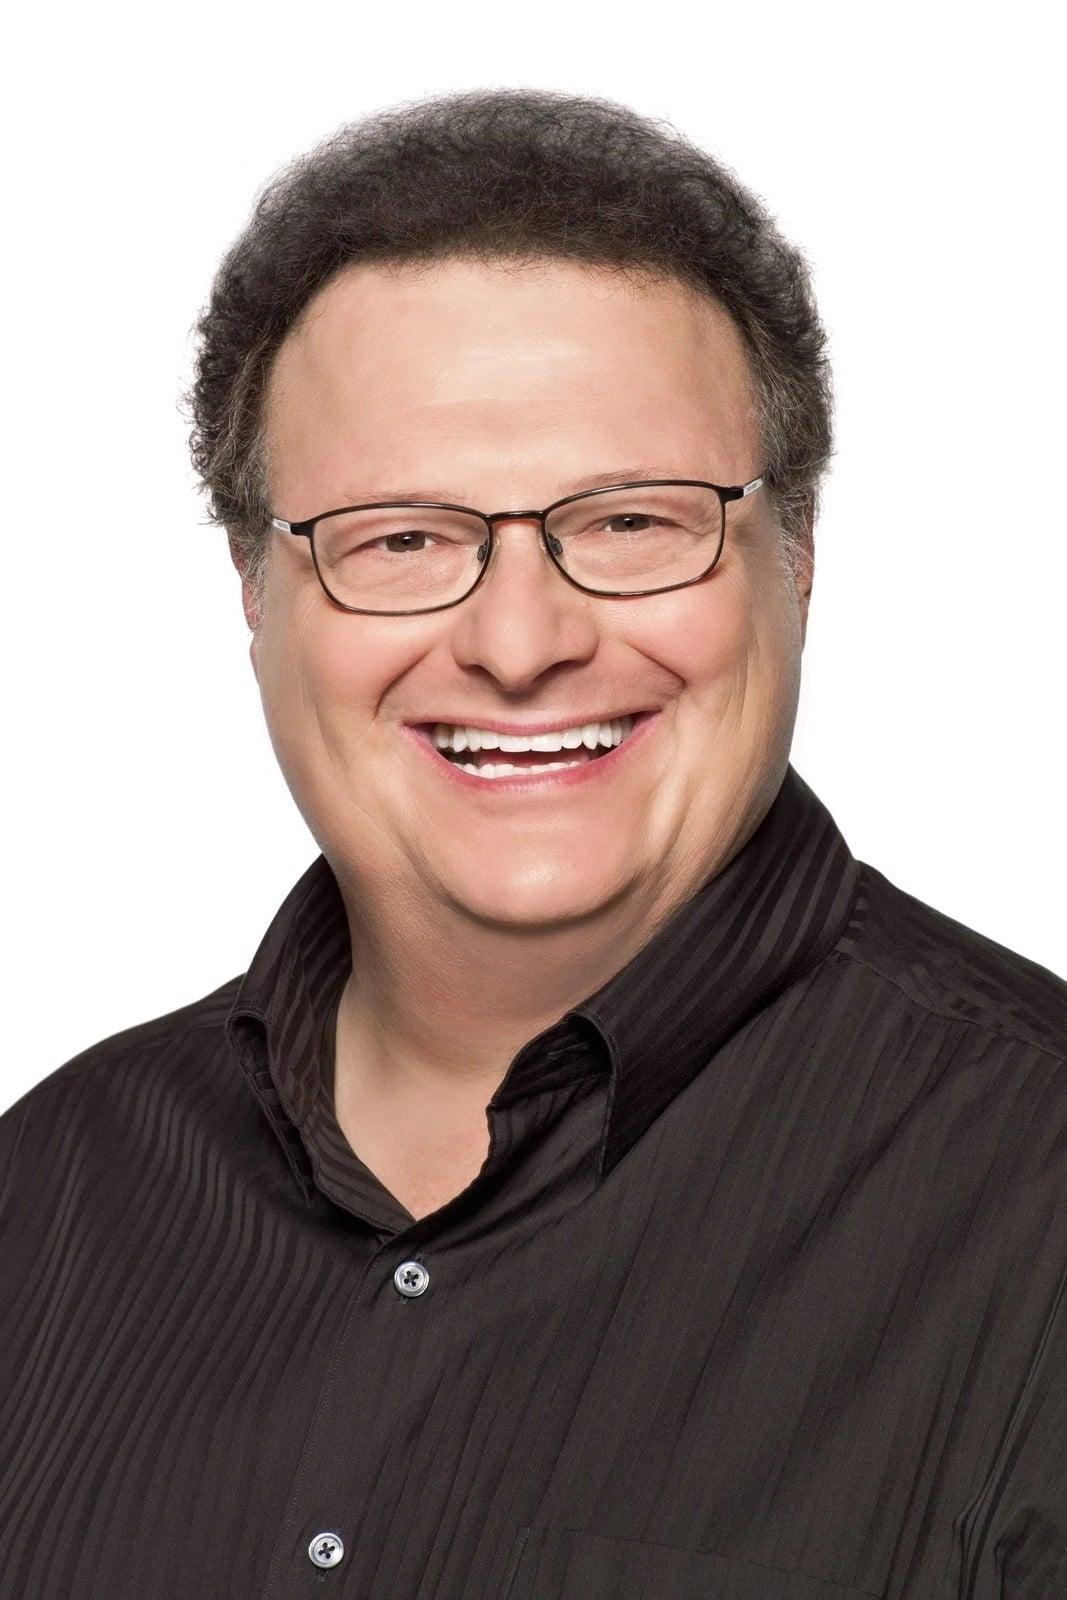 Wayne Knight | Electrician (uncredited)